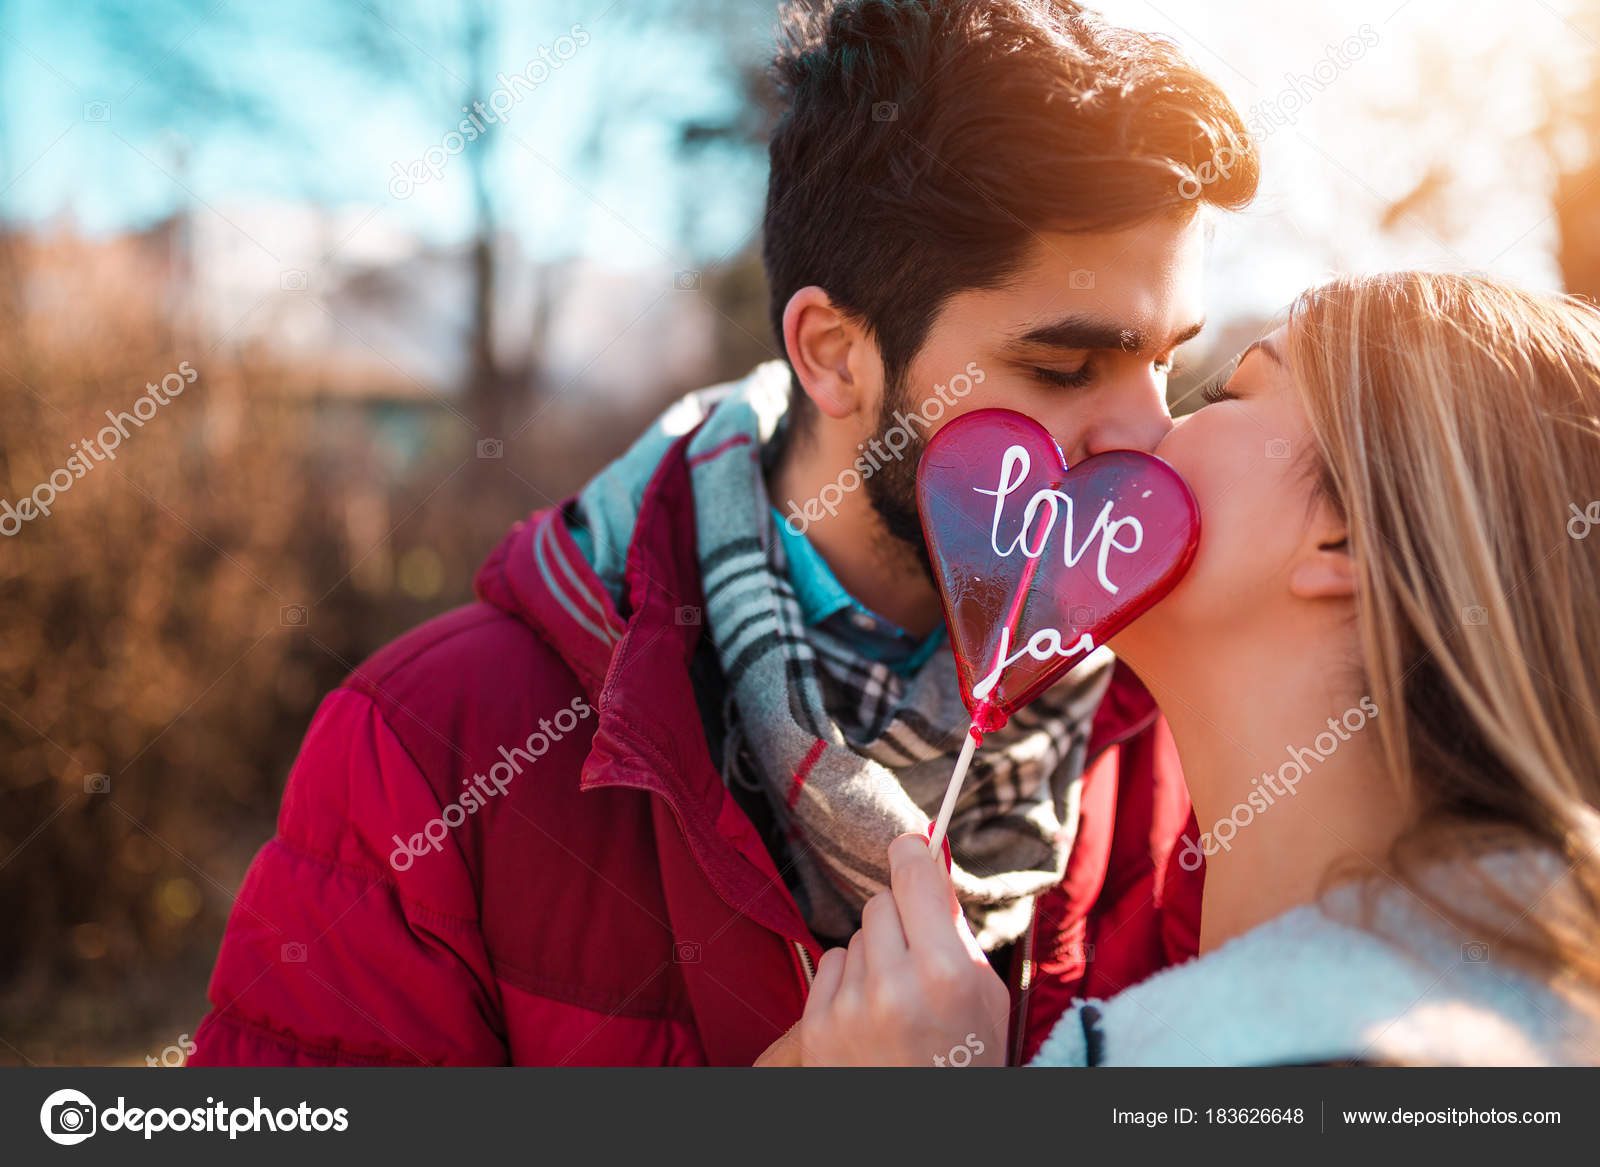 Romantic couple enjoying in moments of happiness. on 1st valentines dayLove, dating, romance. Valentine's day.Romantic couple enjoying in moments of happiness. Love, dating, romance.